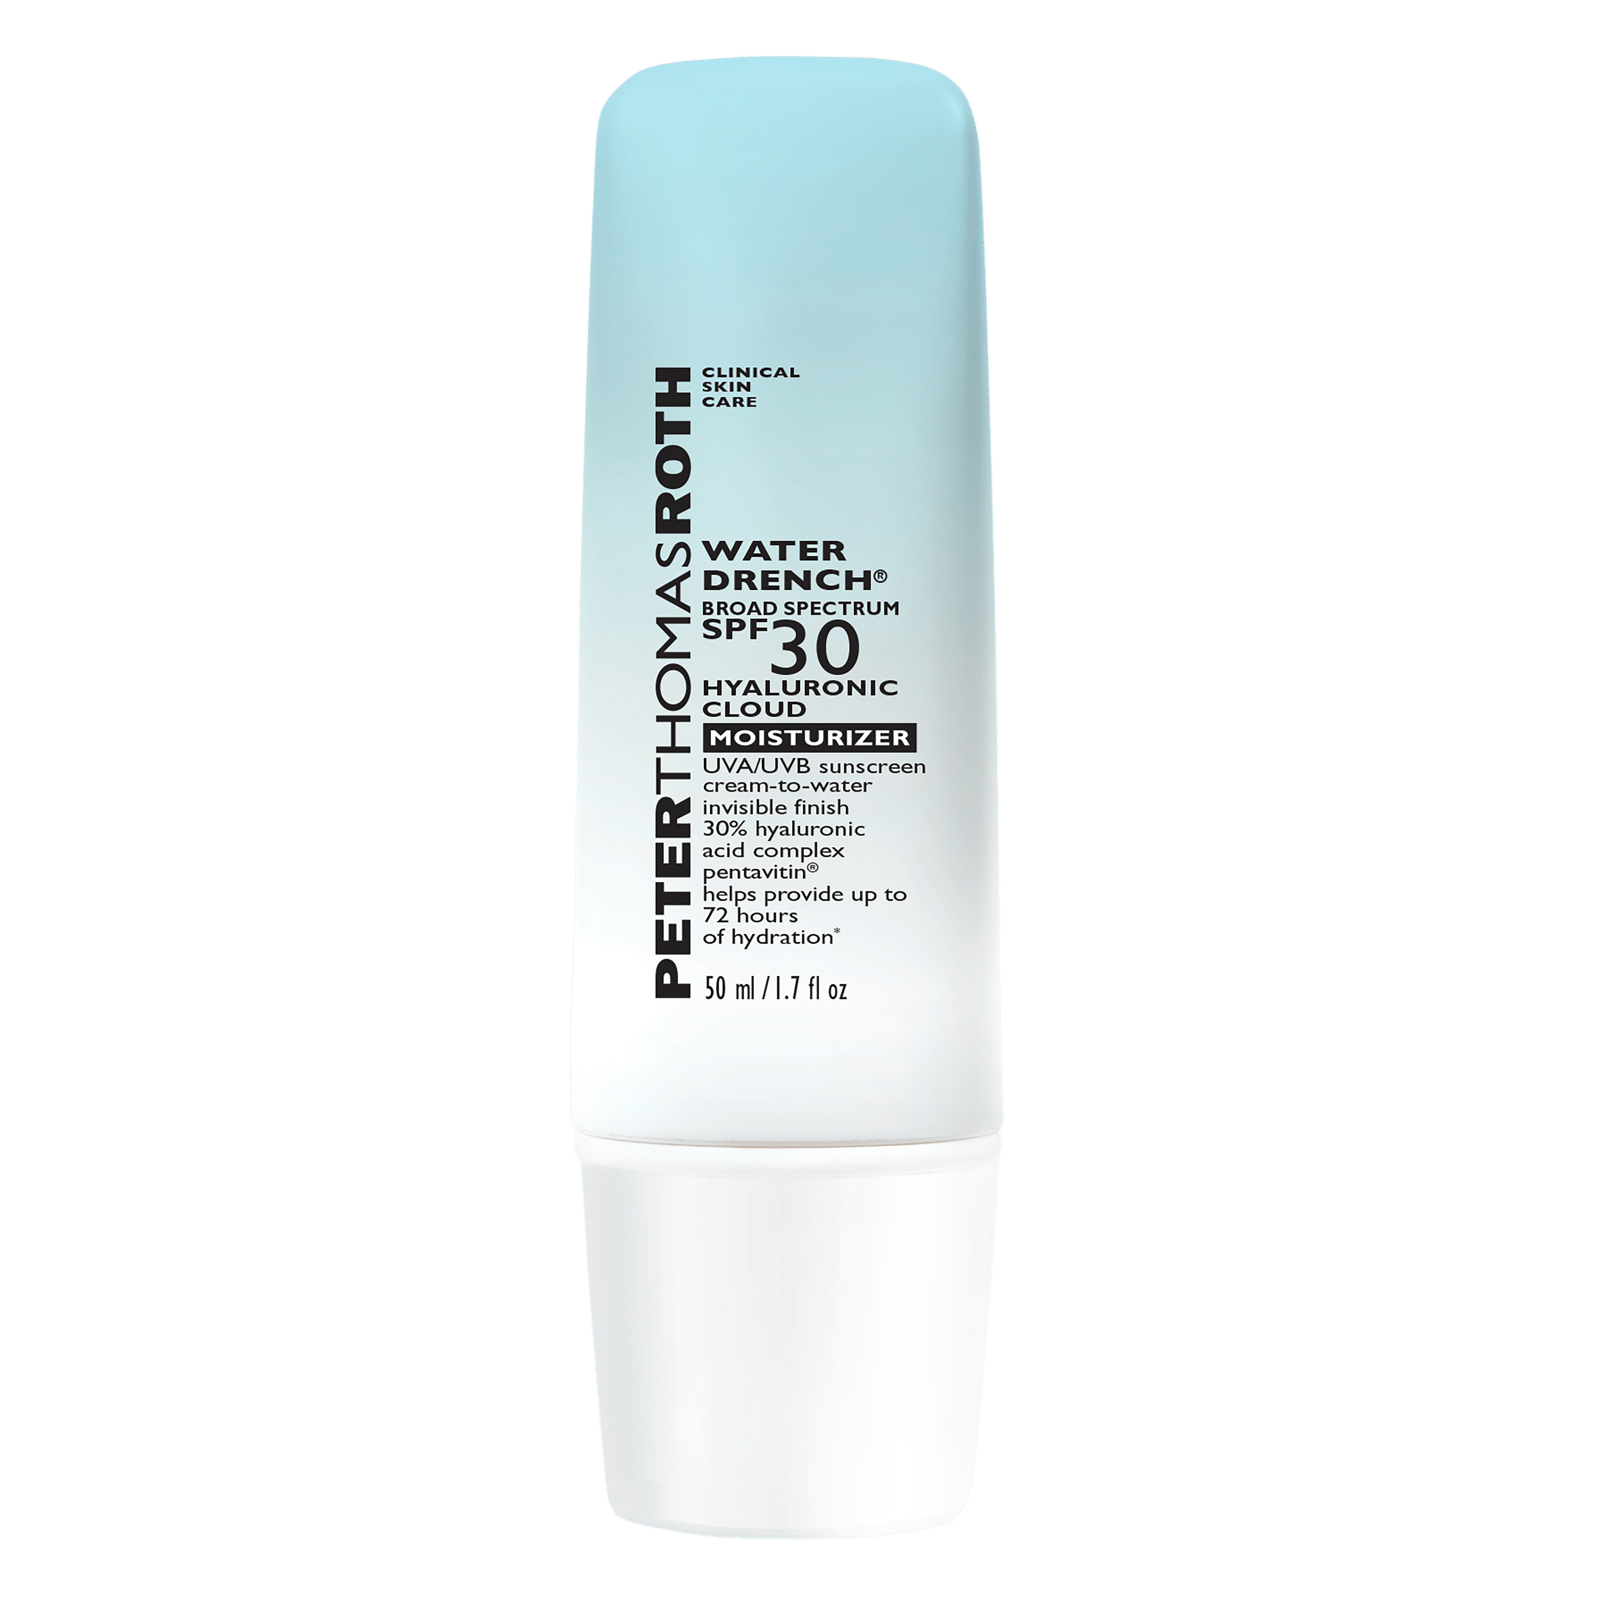 Peter Thomas Roth Water Drench® Broad Spectrum SPF 30 Hyaluronic Cloud Moisturizer 50 ml